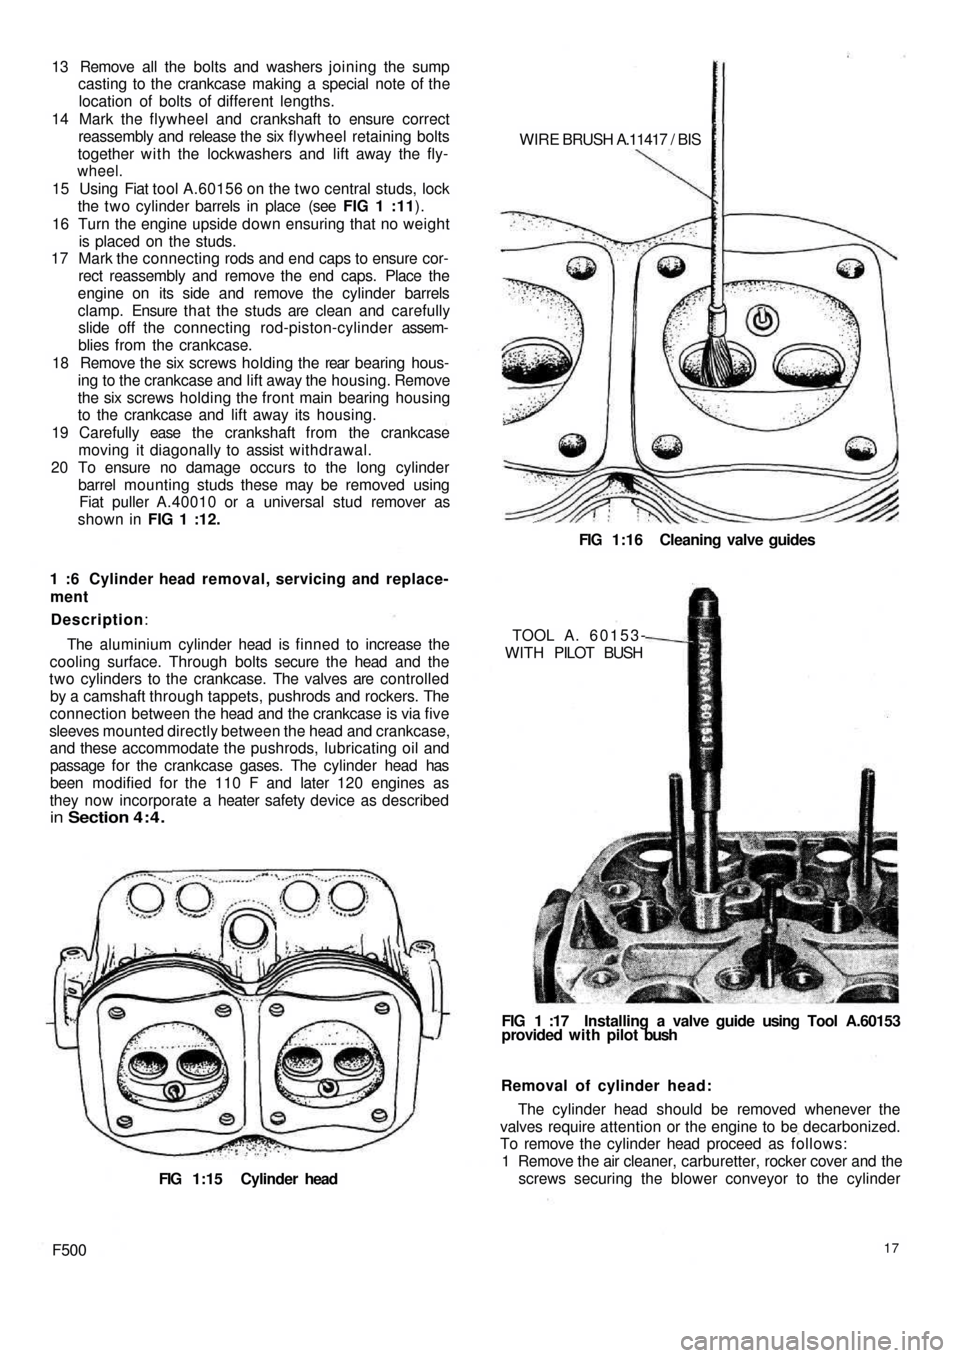 FIAT 500 1958 1.G Workshop Manual 13  Remove all the bolts and washers joining the sump
casting to the crankcase making a special note of the
location of bolts of different lengths.
14 Mark the flywheel and crankshaft to ensure correc